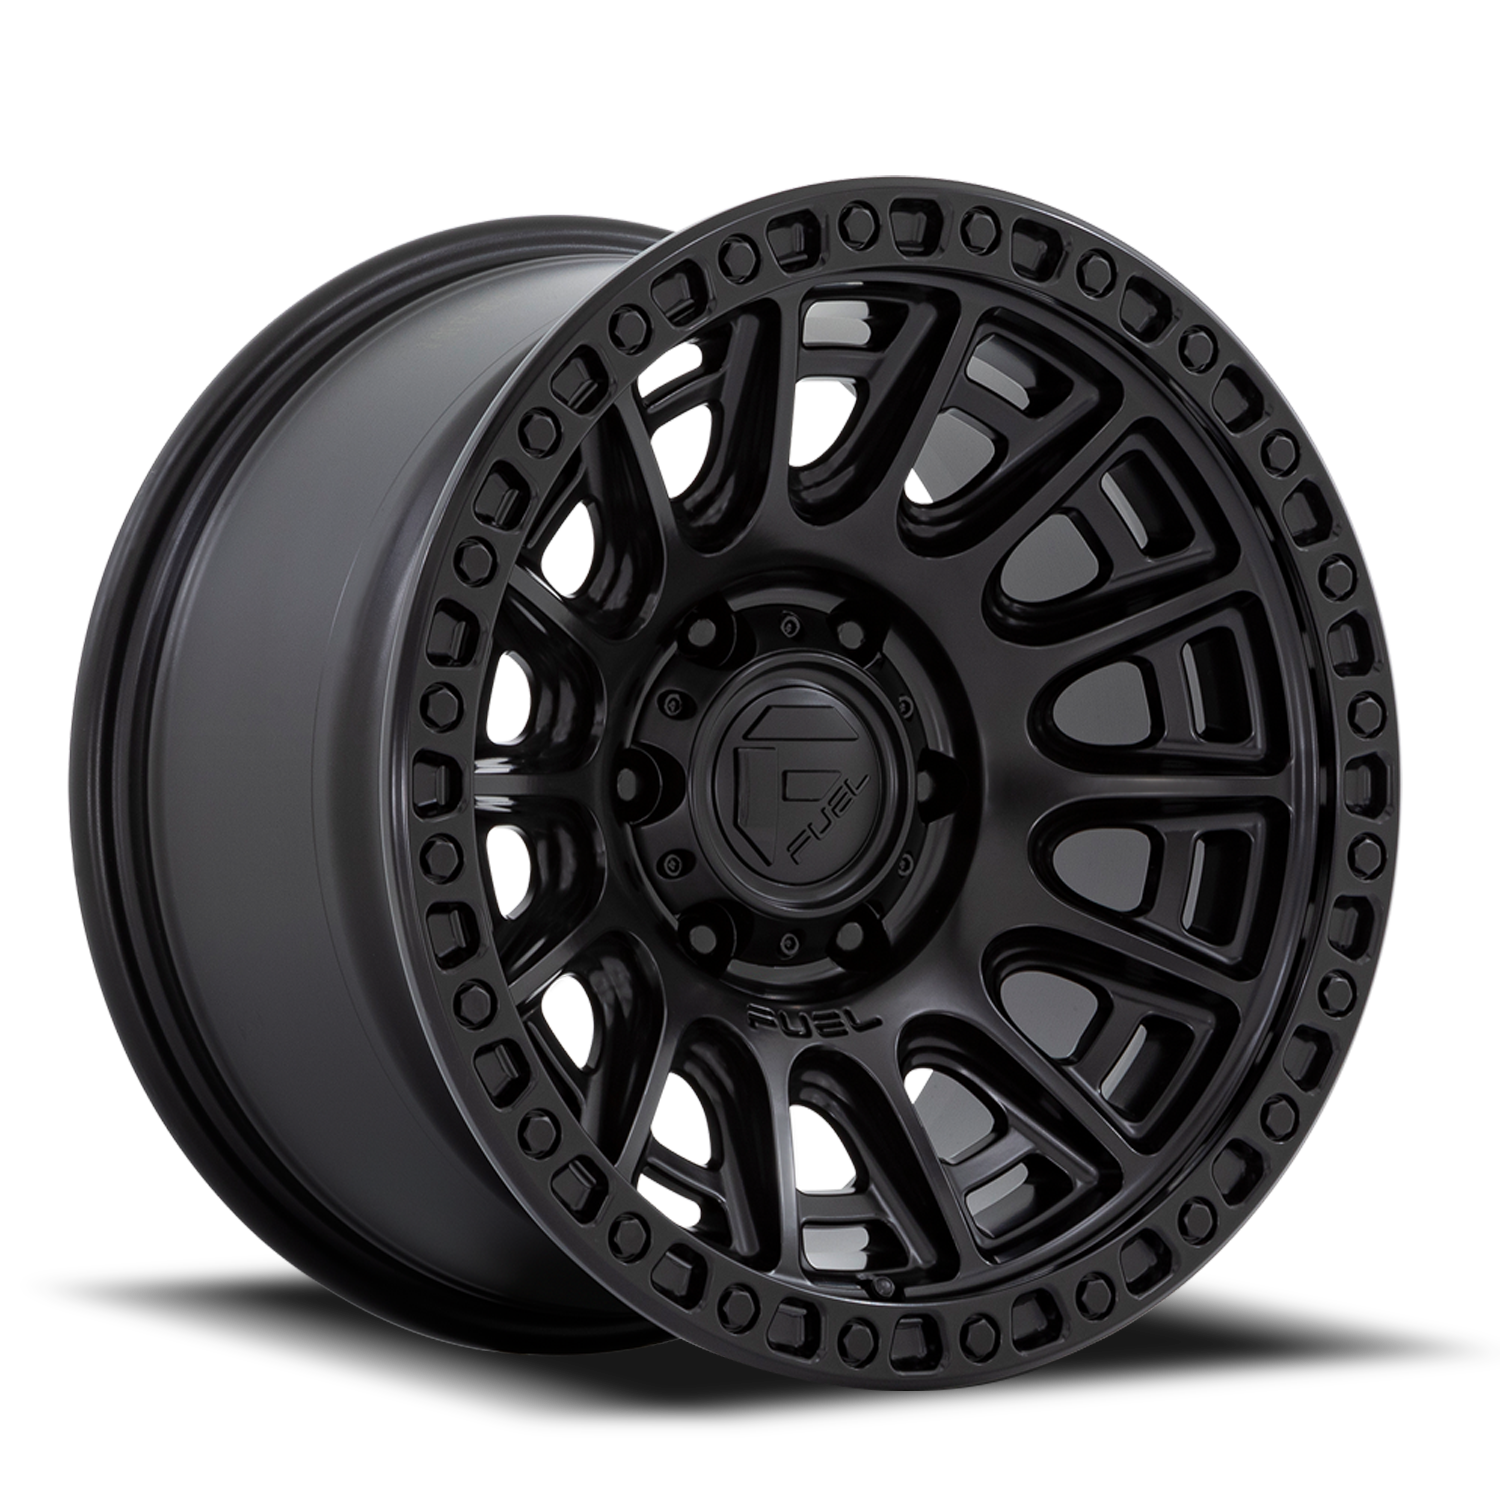 Aluminum Wheels 17X9 Cycle D832 6 On 139.7 Blackout 106.1 Bore 1 Offset 36 Lbs  Fuel Off Road Wheels